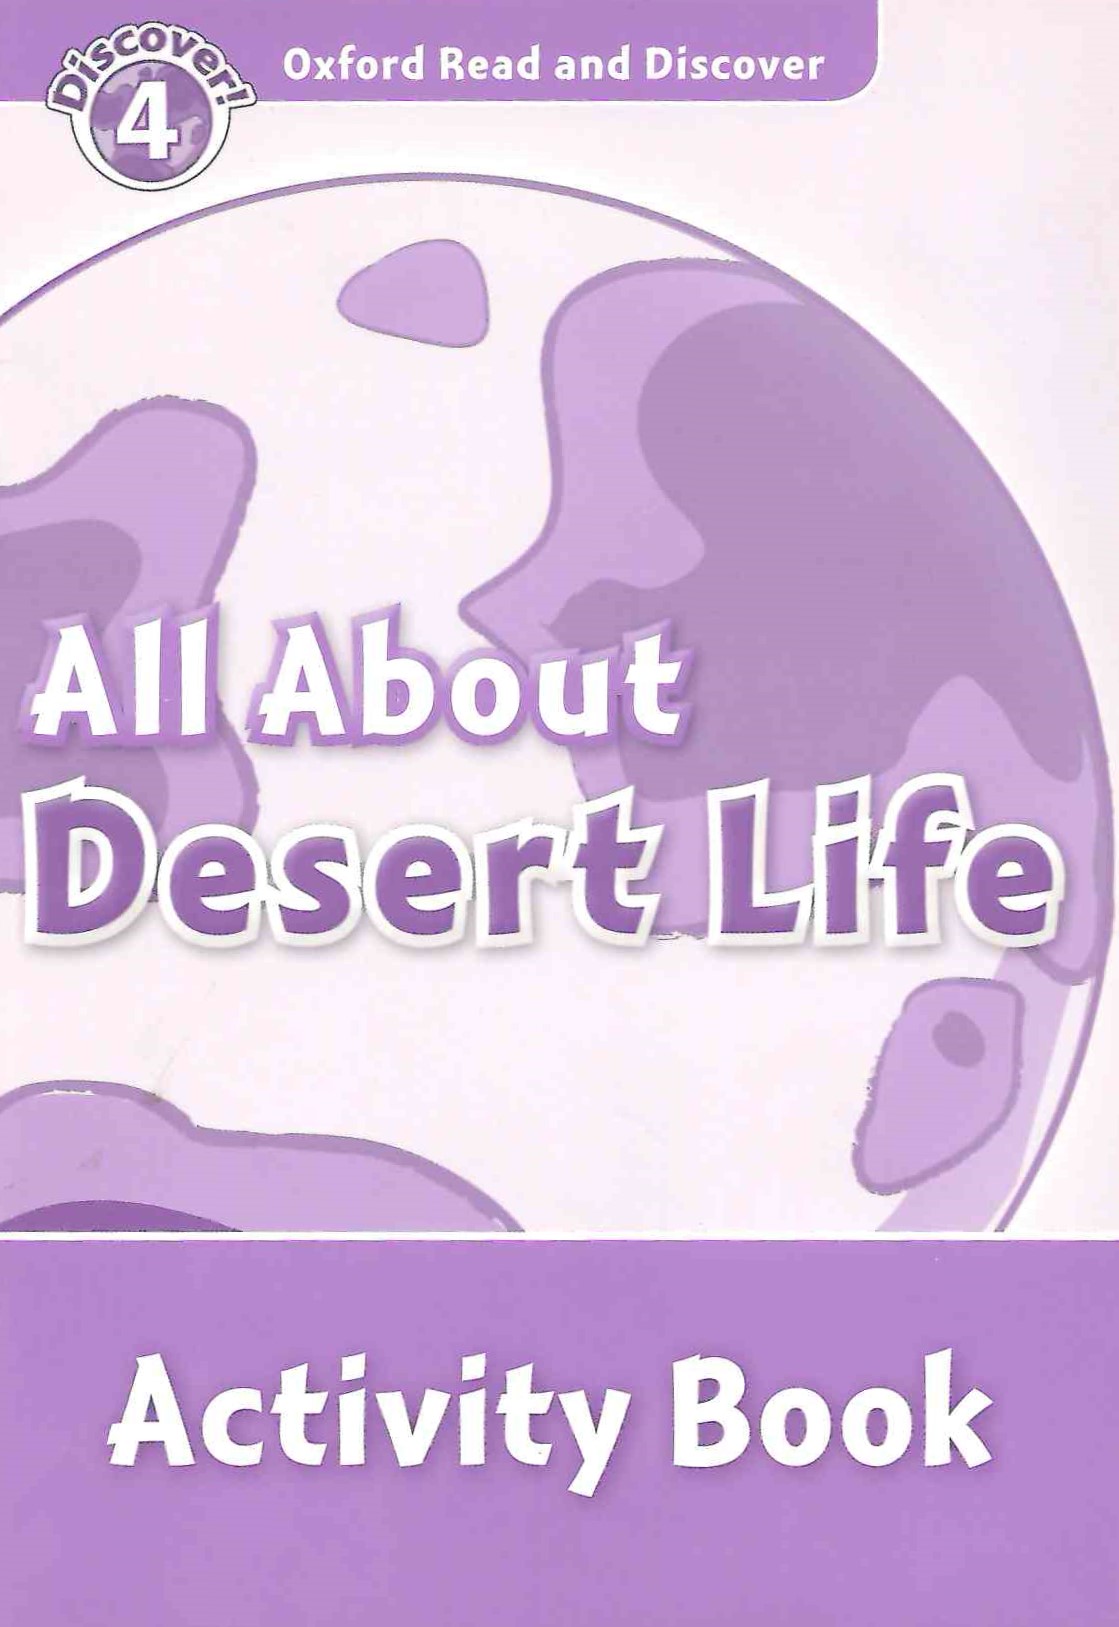 All About Desert Life Activity Book - 1